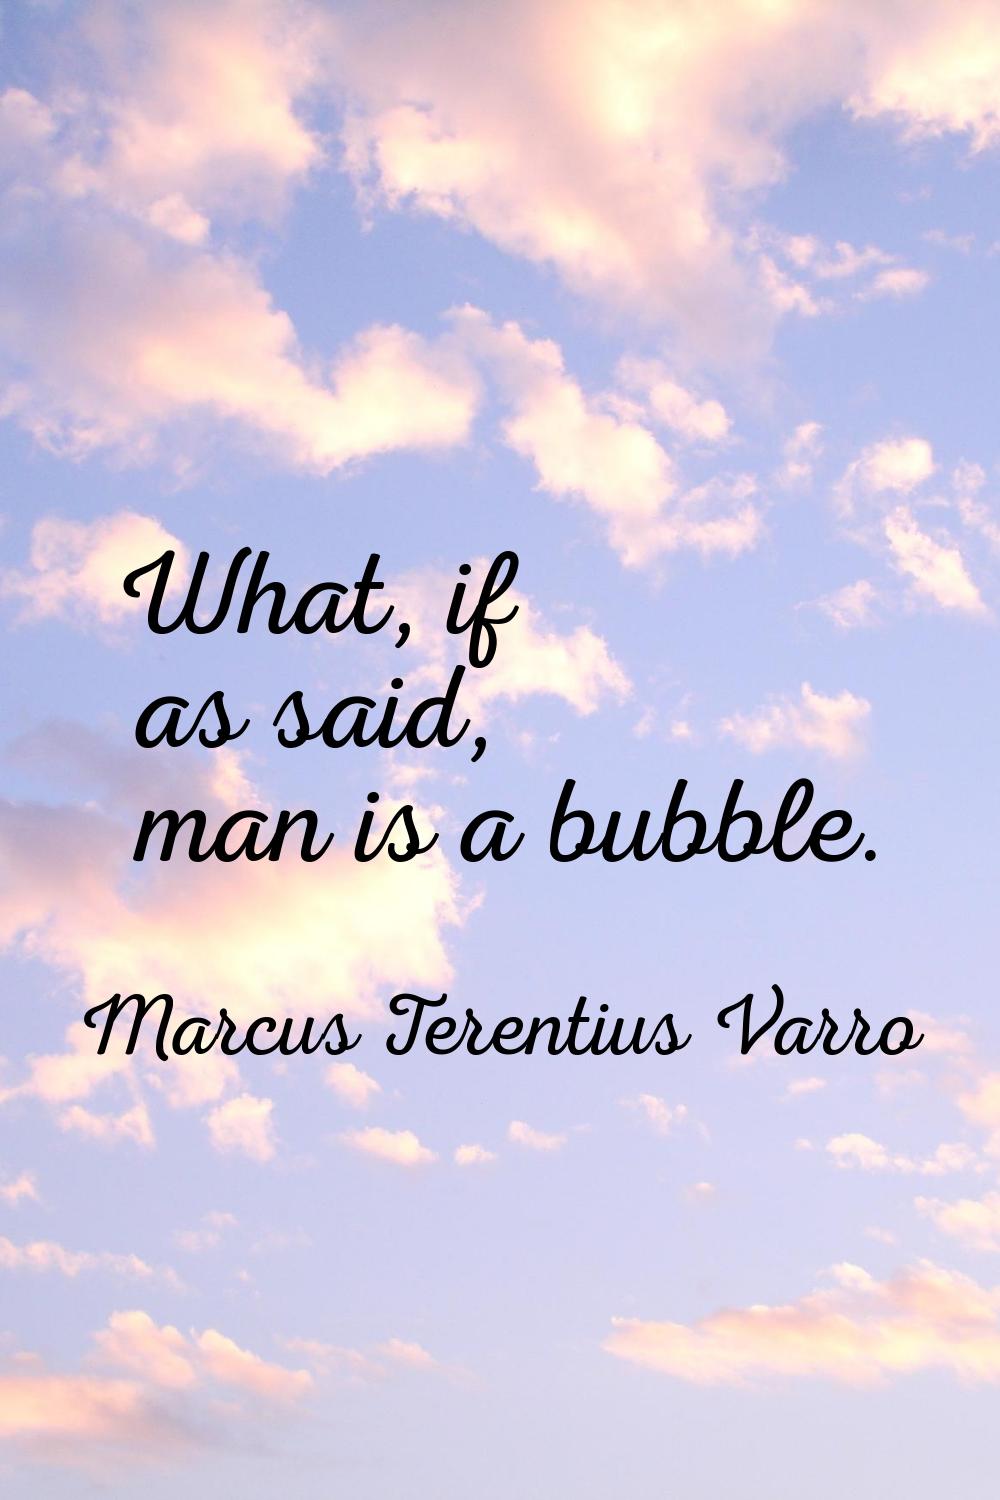 What, if as said, man is a bubble.